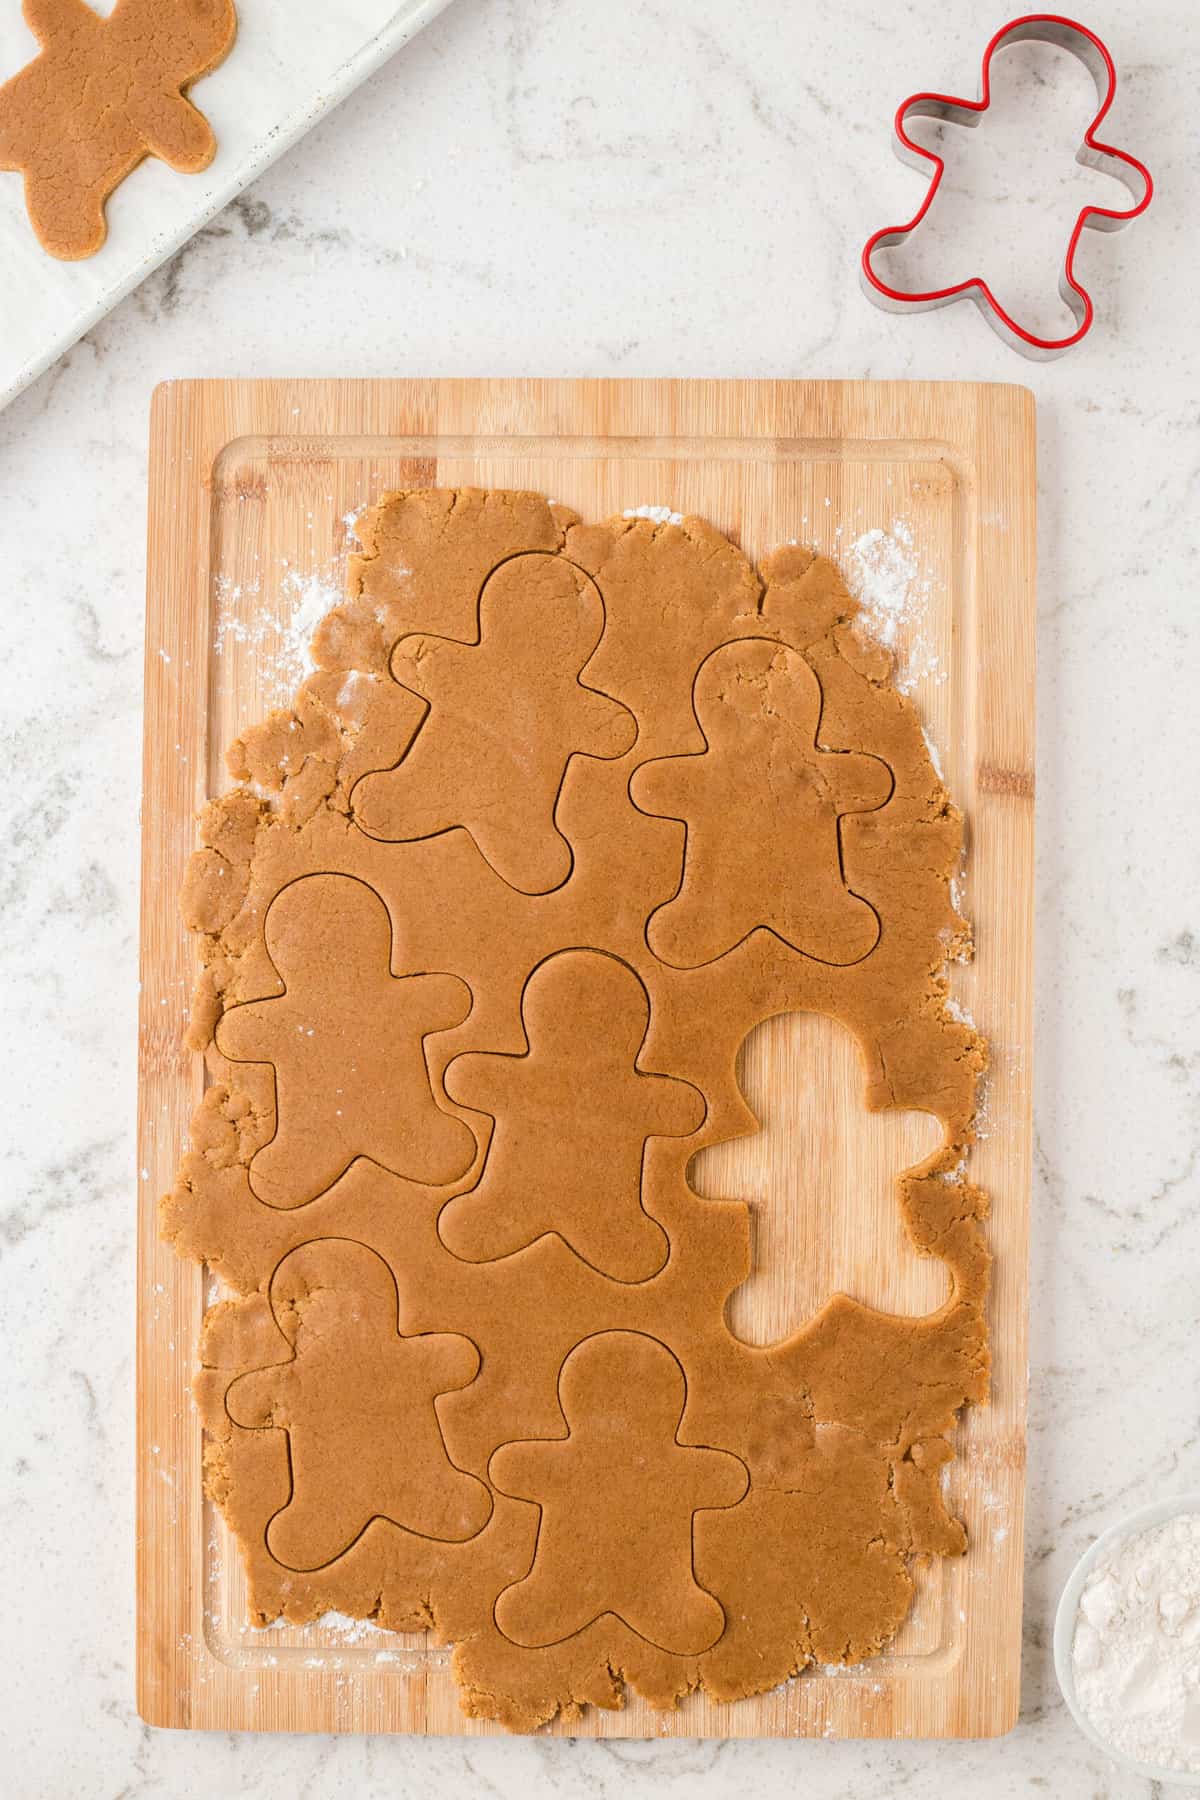 Use the Gingerbread Cookie Cutter to make gingerbread man shapes in the rolled out dough.